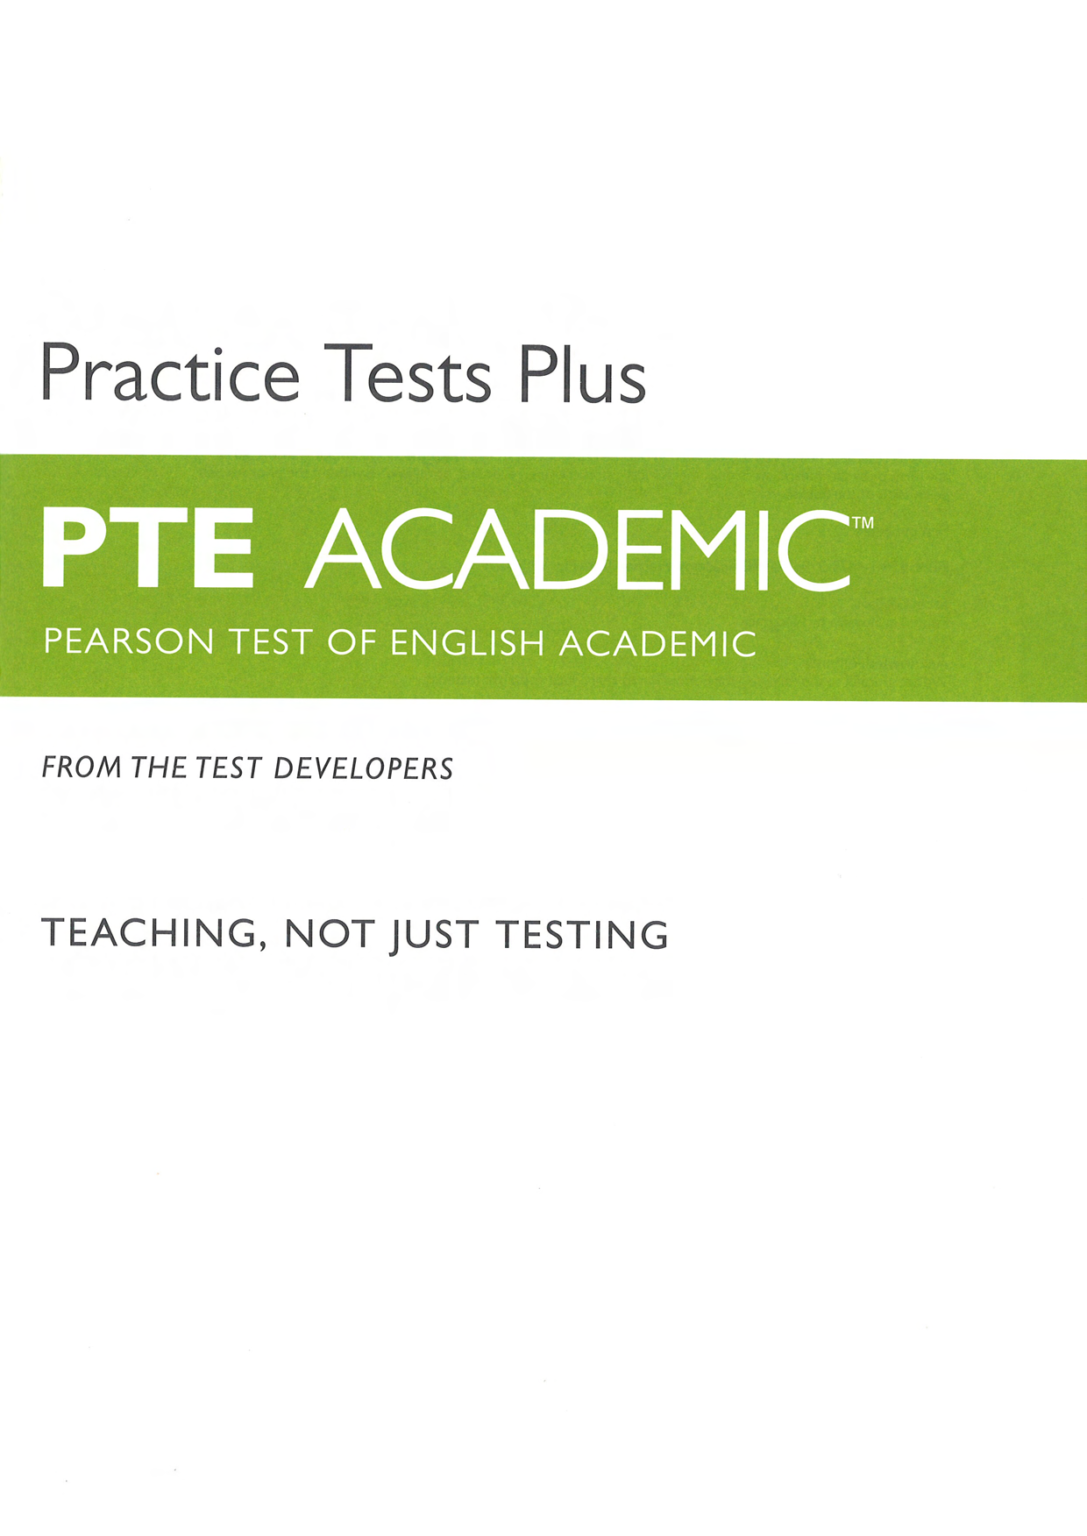 Pearson Practice Tests Plus With Key PTE Academic 0003 1087x1536 